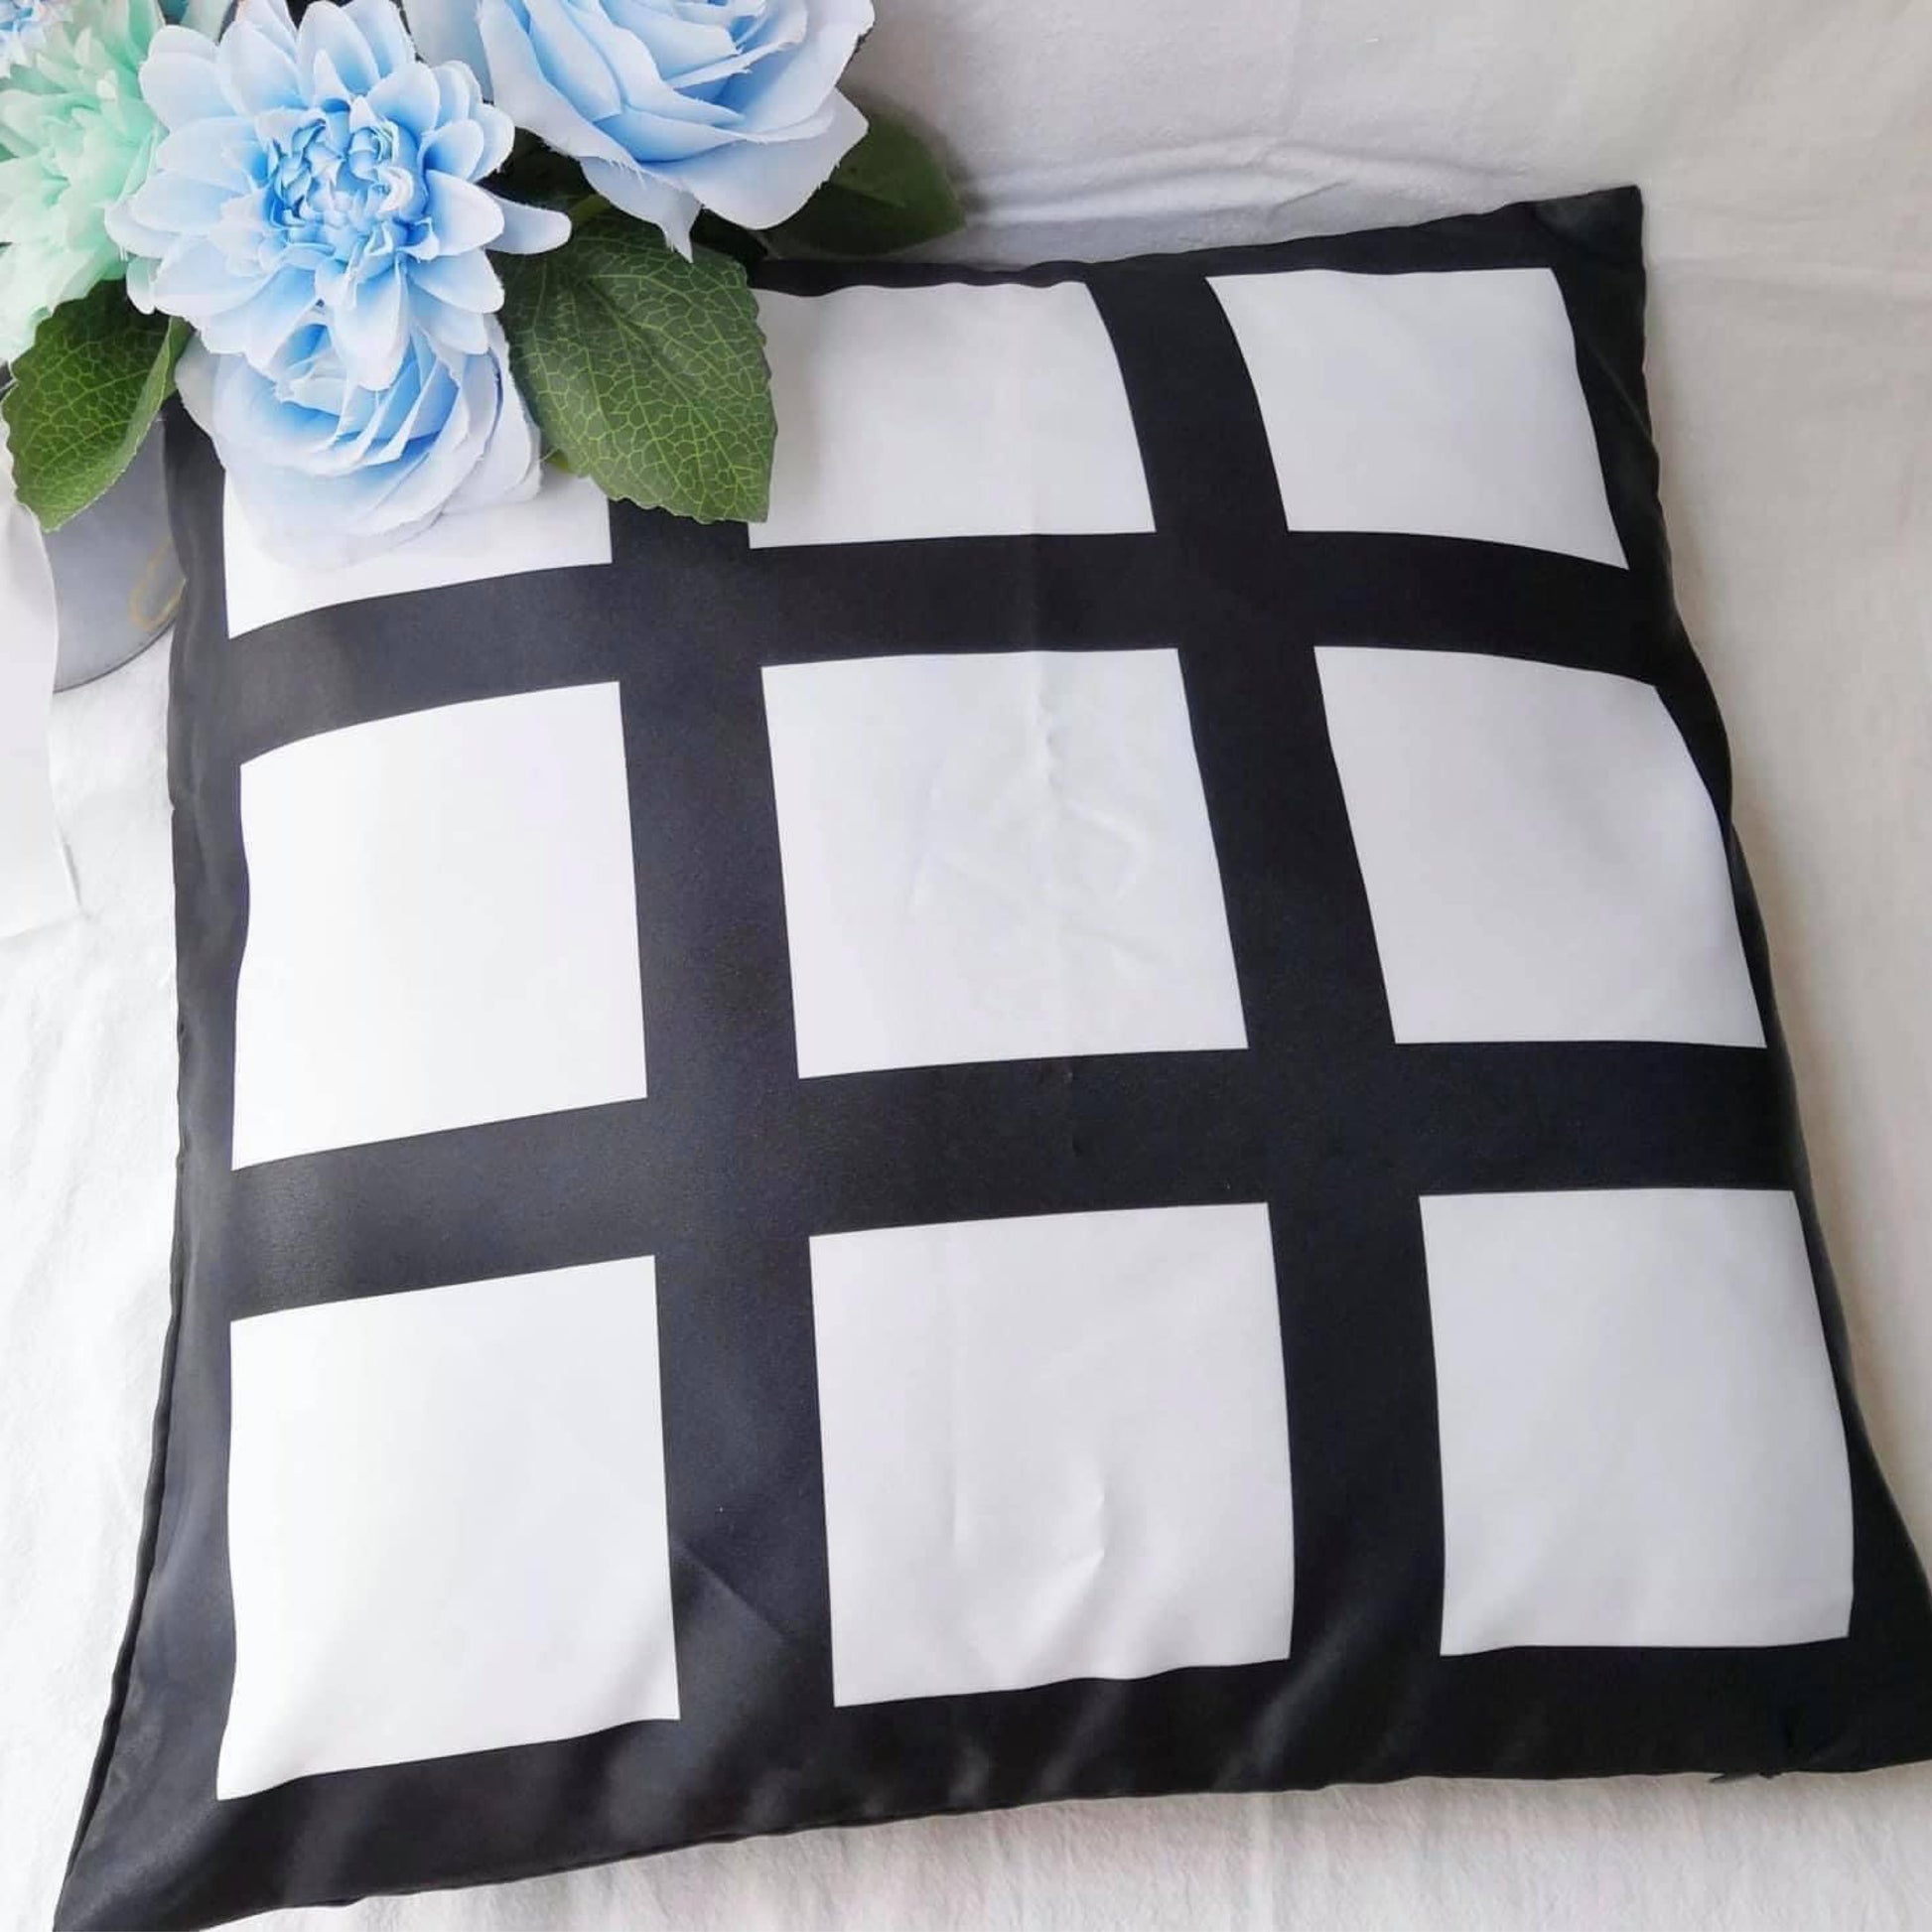 9 Panel Pillow Cases - Carolina Blanks  And More LLC